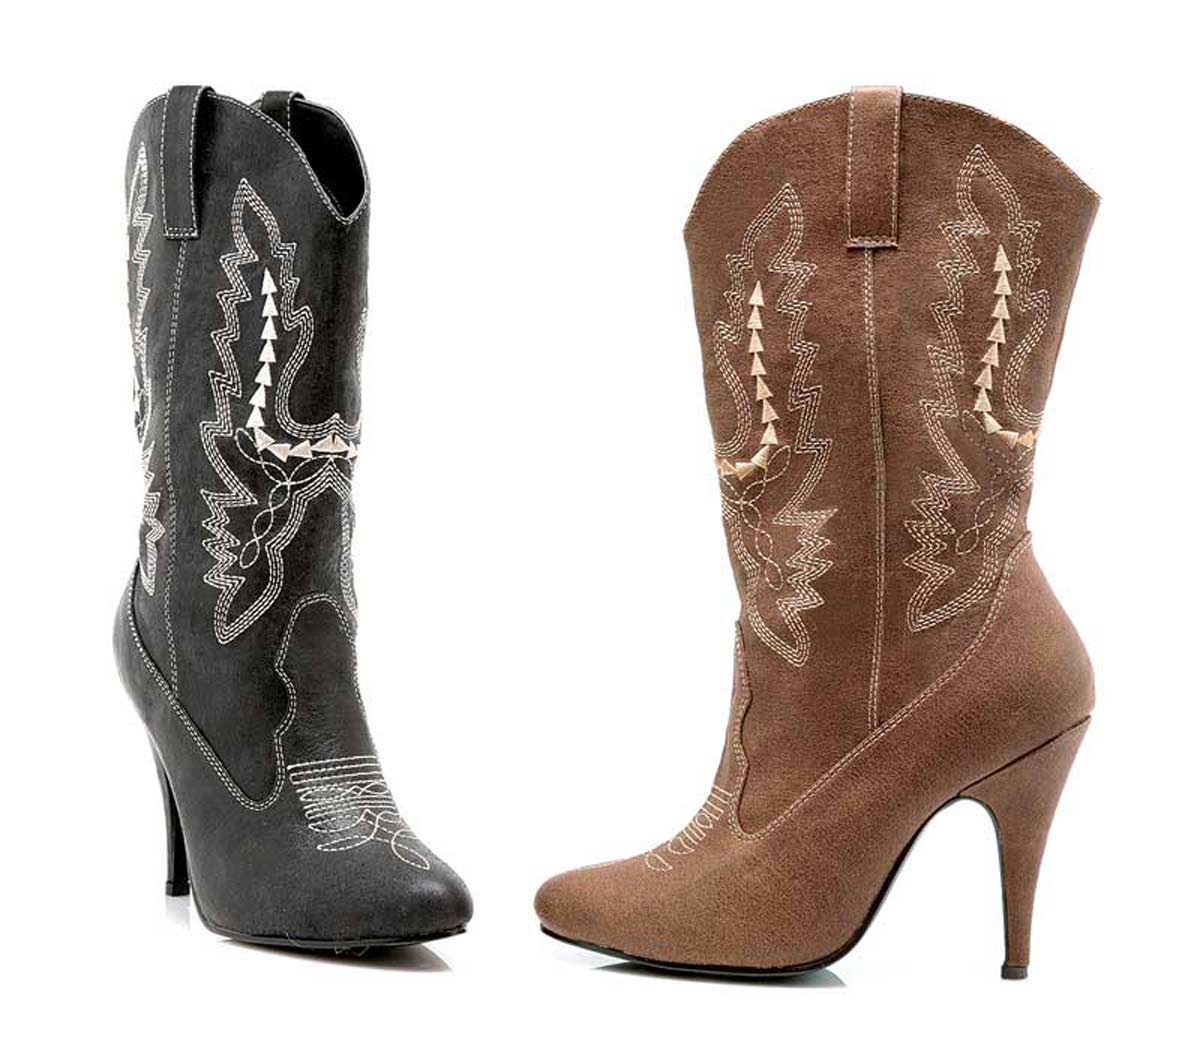 Ellie Shoes Halloween 418-COWGIRL - Black in Sexy Boots - $58.07